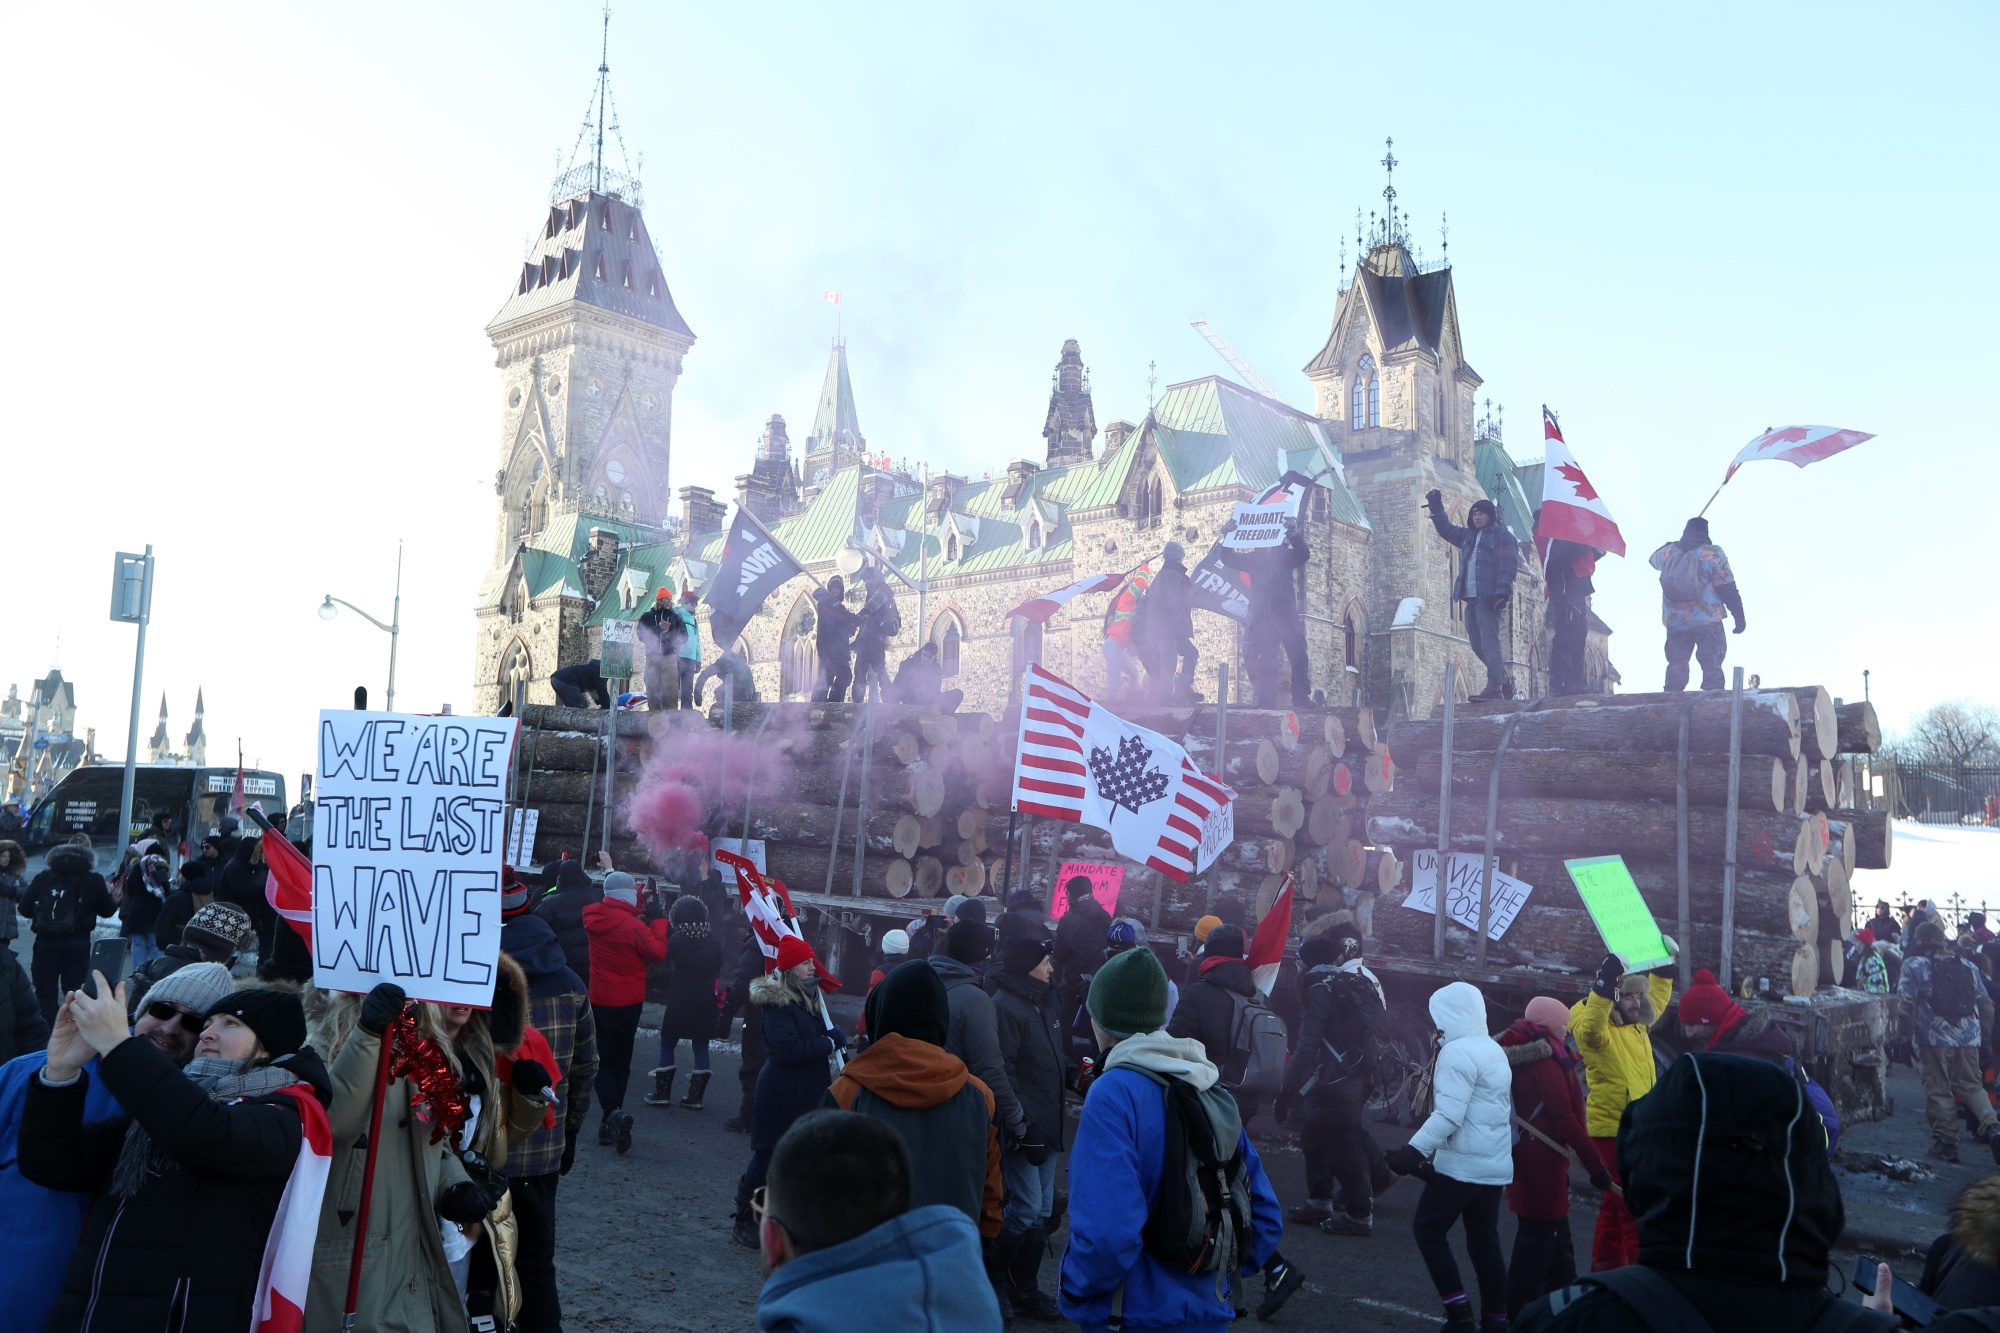 Demonstrators stand on a logging truck outside the parliament buildings in Ottawa on Jan. 29, 2022.